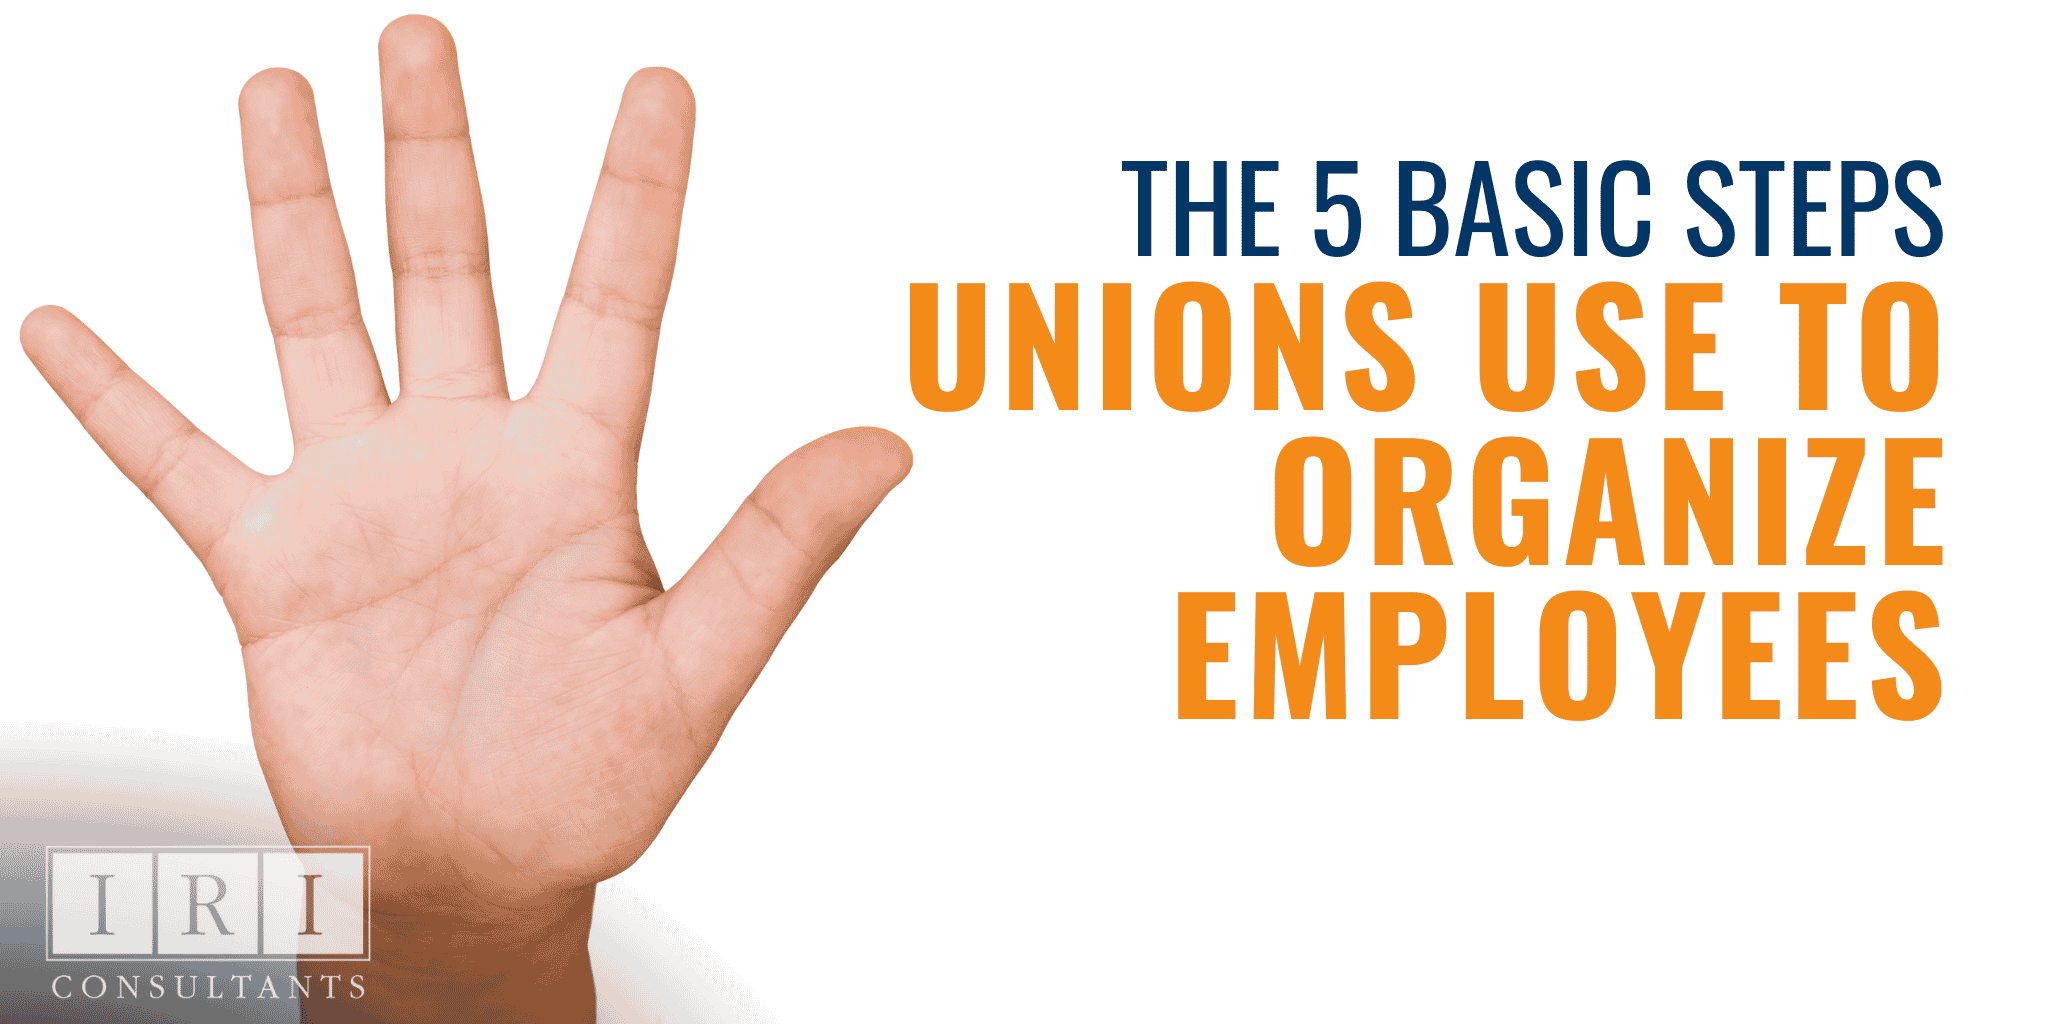 The 5 Basic Steps Unions Use to Organize Employees